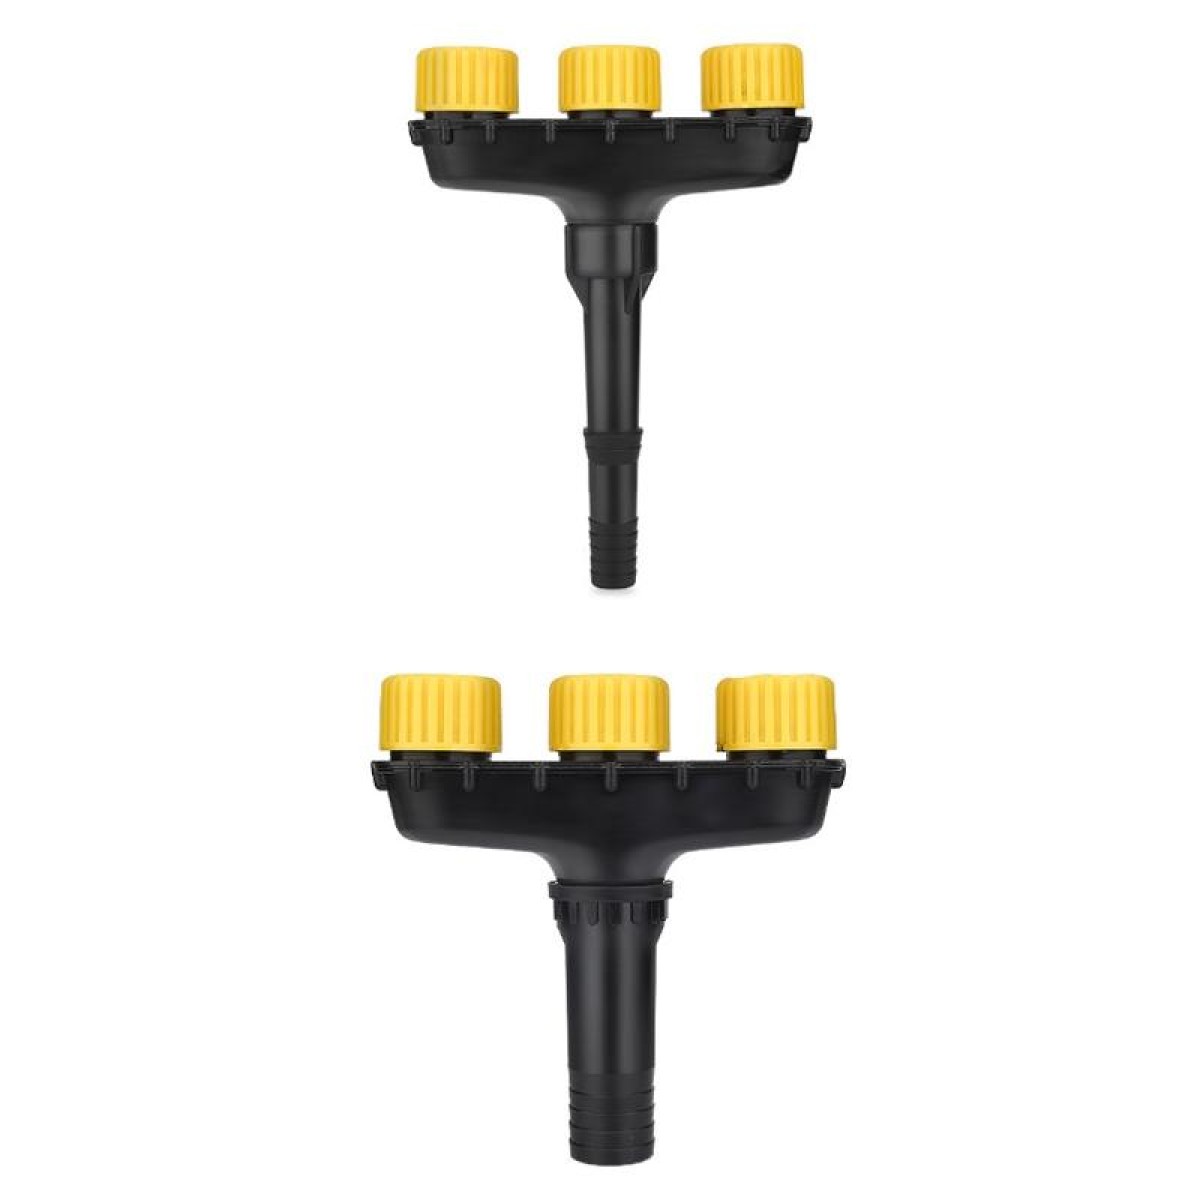 DKSSQ Gardening Watering Sprinkler Nozzle, Specification: 3 Head with 1 inch/1.2 inch Interface